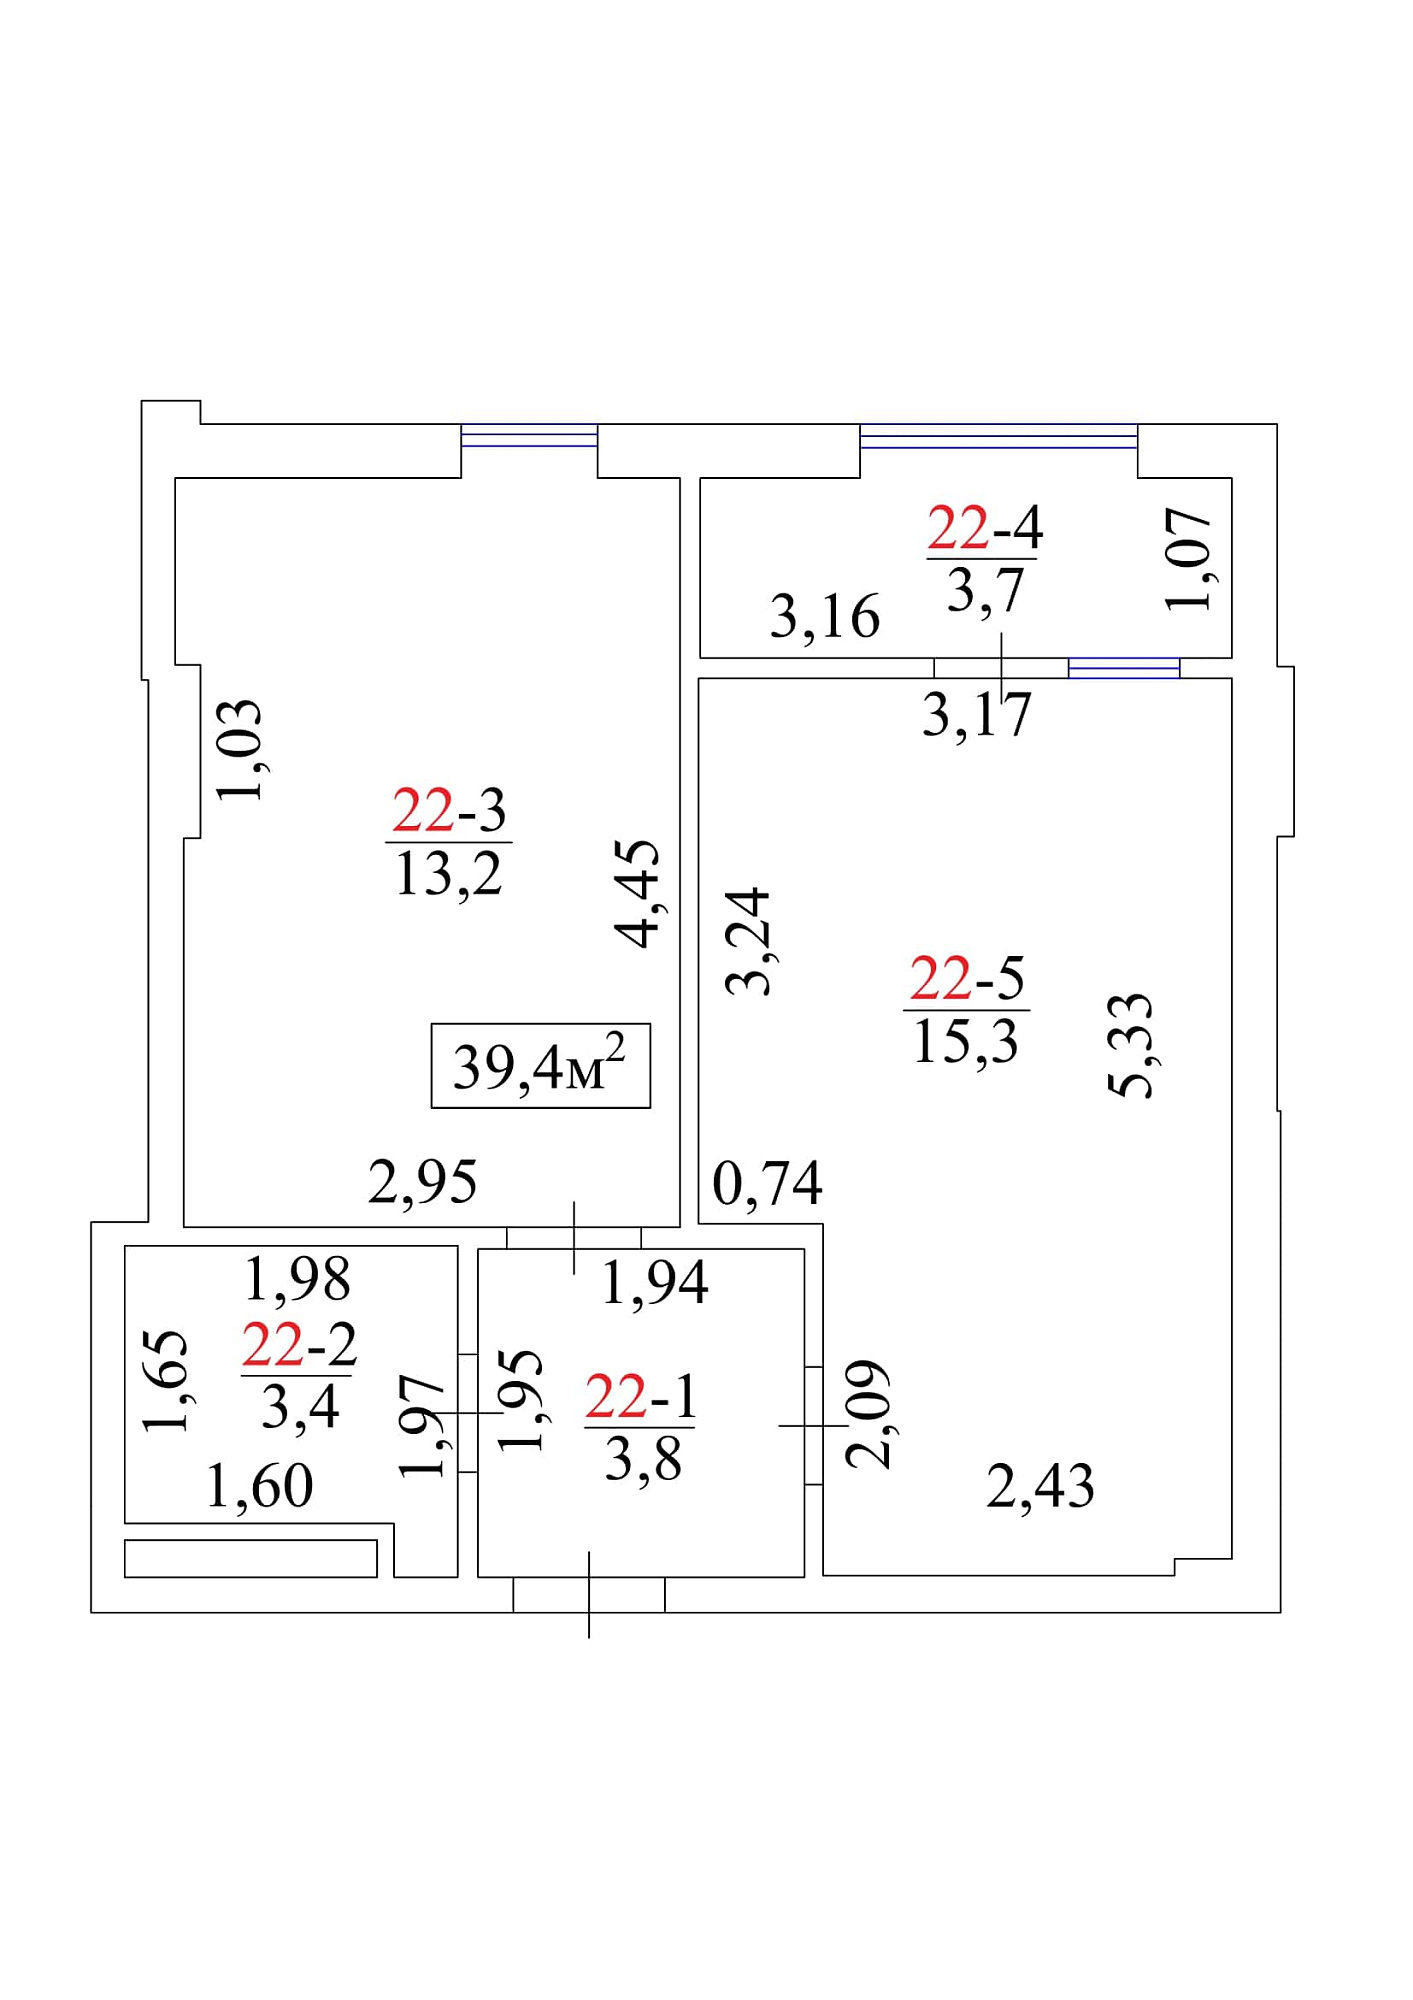 Planning 1-rm flats area 39.4m2, AB-01-03/00023.